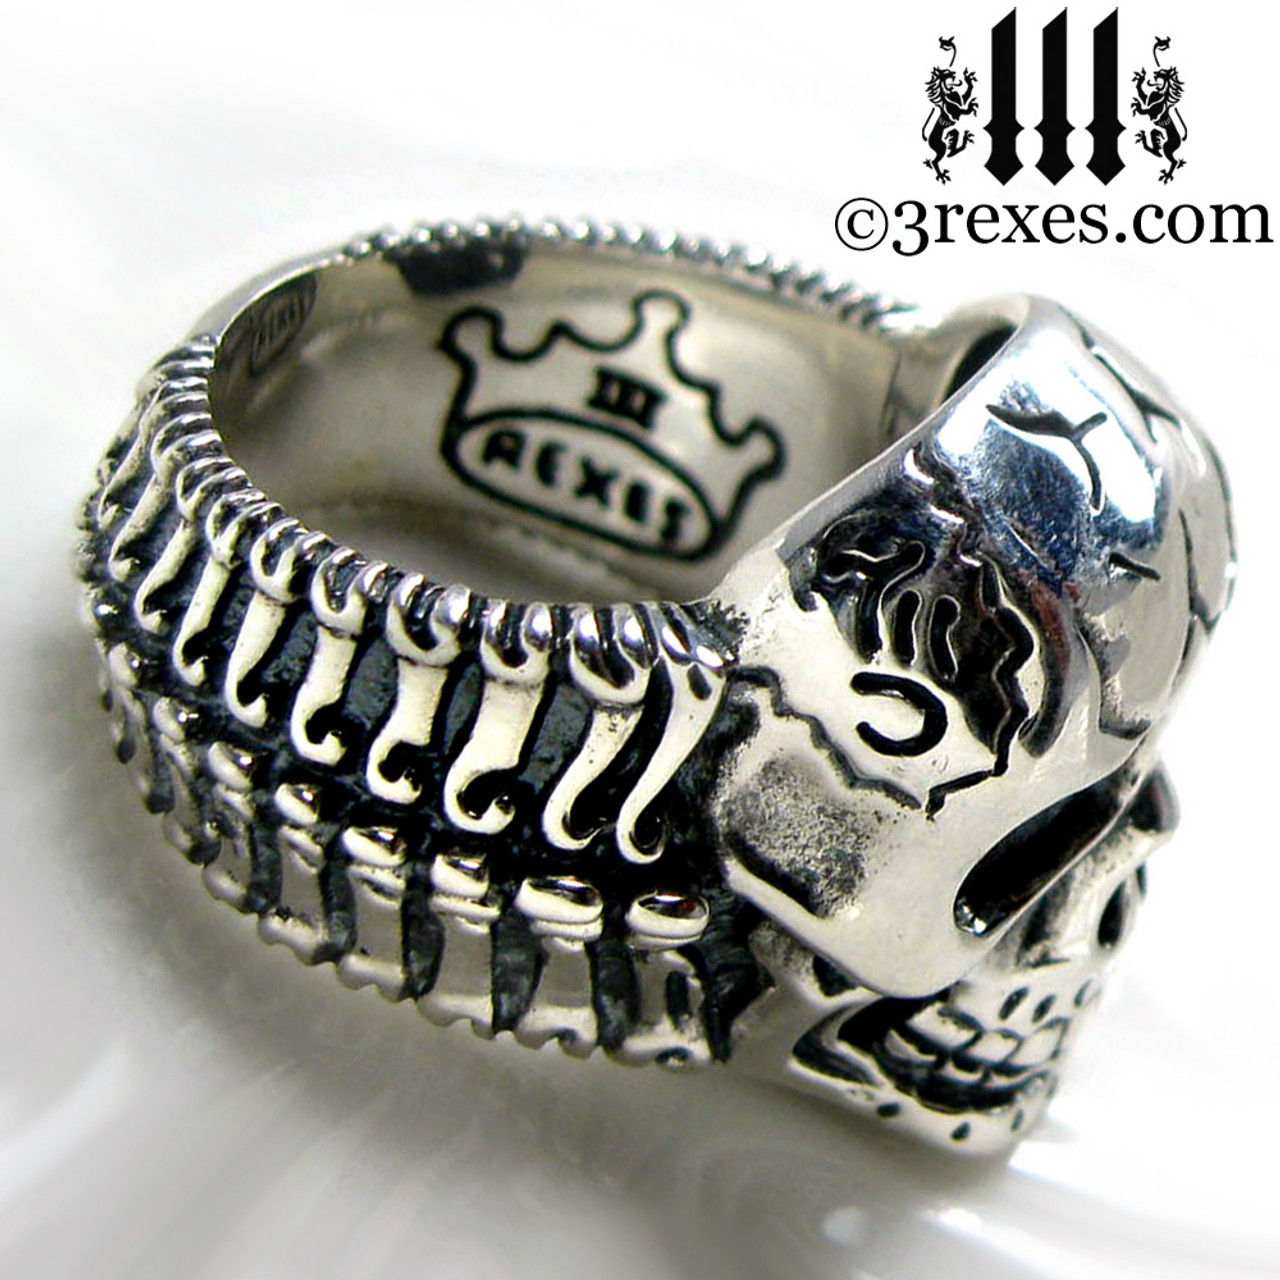 Skull, Silver Signet Ring, Mens Silver Ring by Proclamation Jewelry